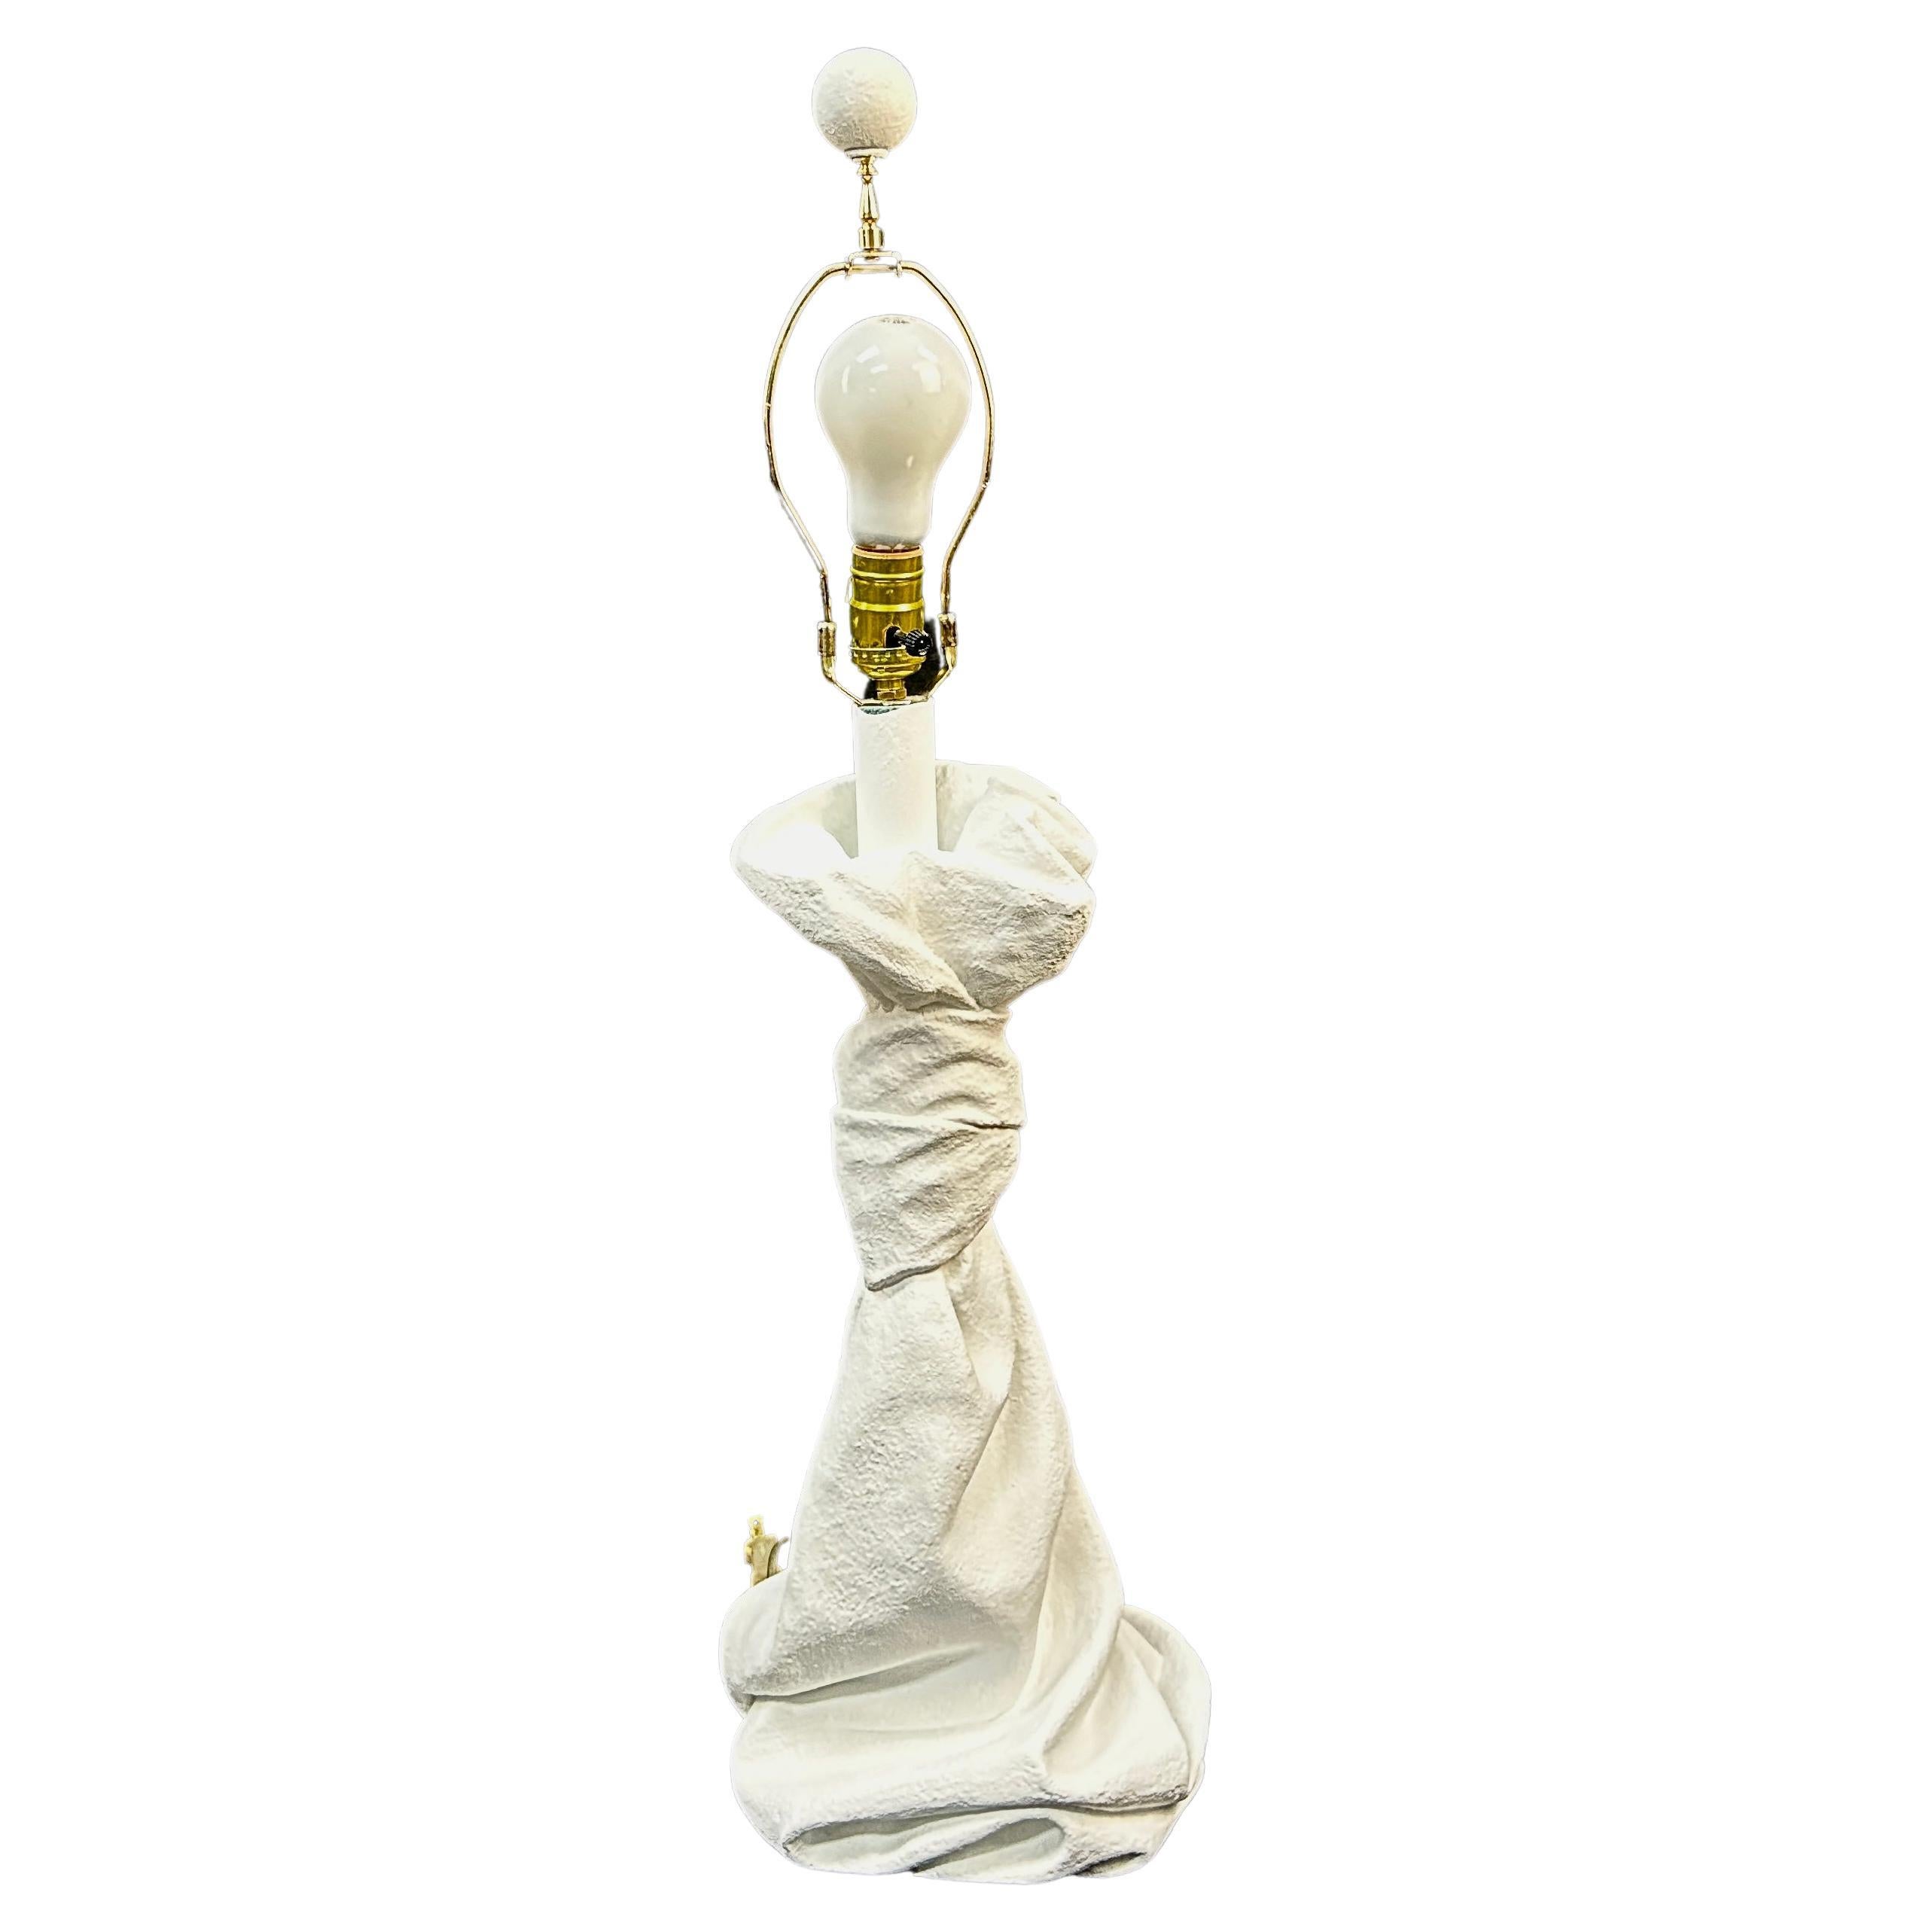 20th century plaster table lamp in the John Dickinson style of the 1970s. Draped and knotted, this unique lamp appears sculptural in design. Lamp includes the harp and the original  plaster ball finial. This heavy and sturdy lamp is in good working